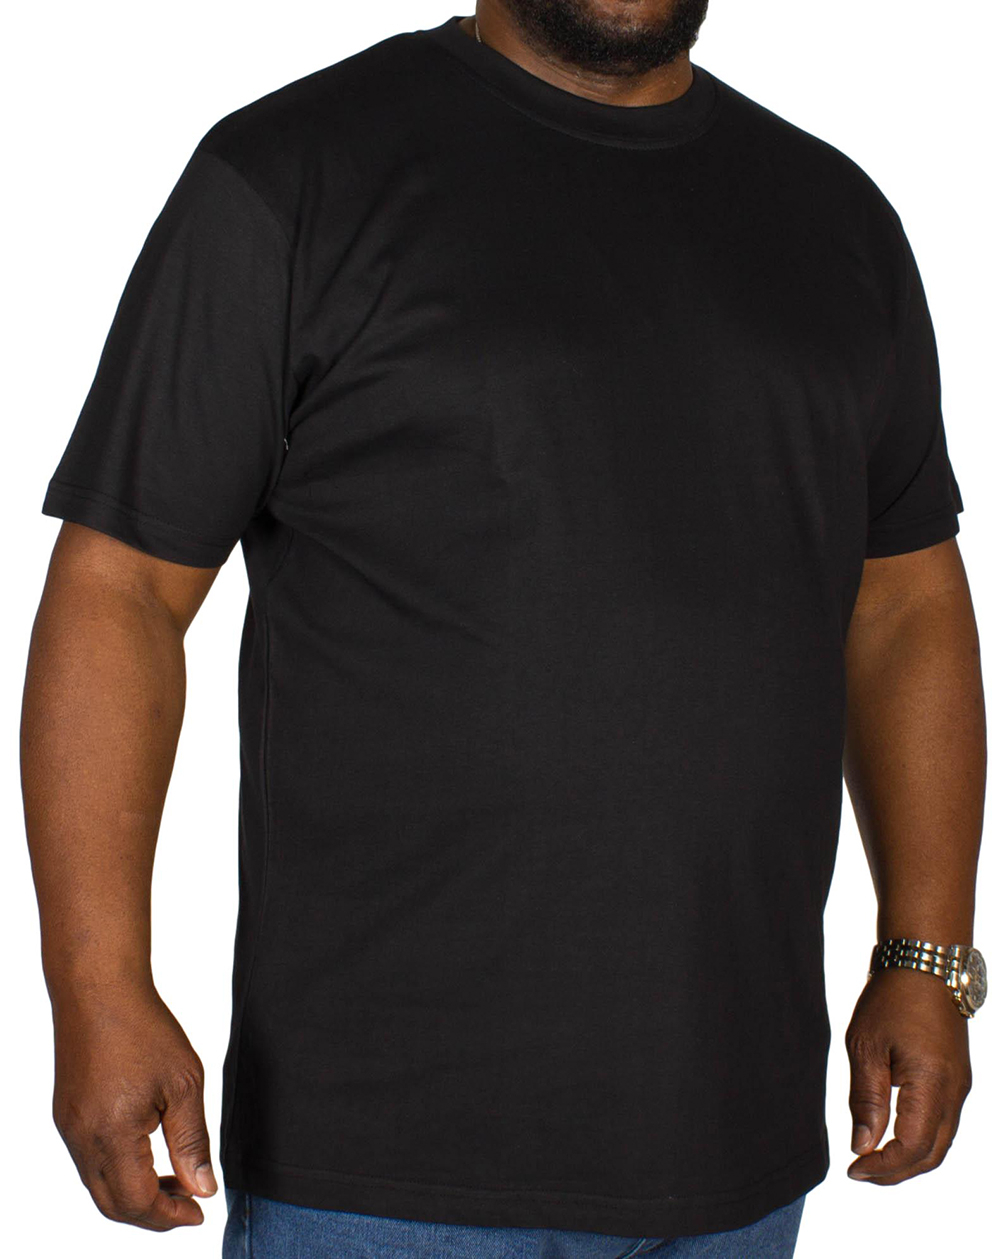 Large Mens T-Shirts in Big Sizes 3XL 